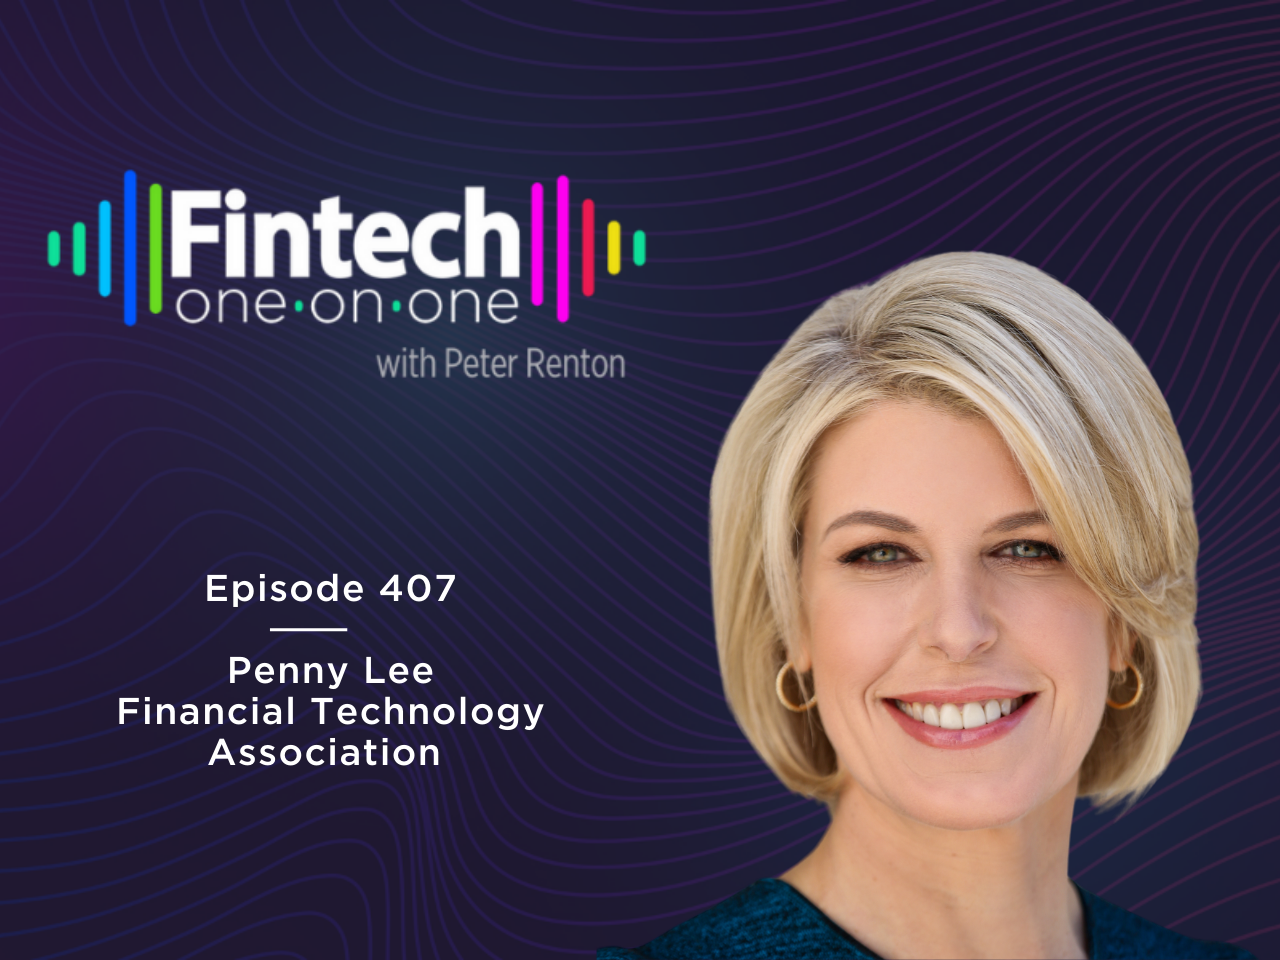 Penny Lee, CEO of the Financial Technology Association